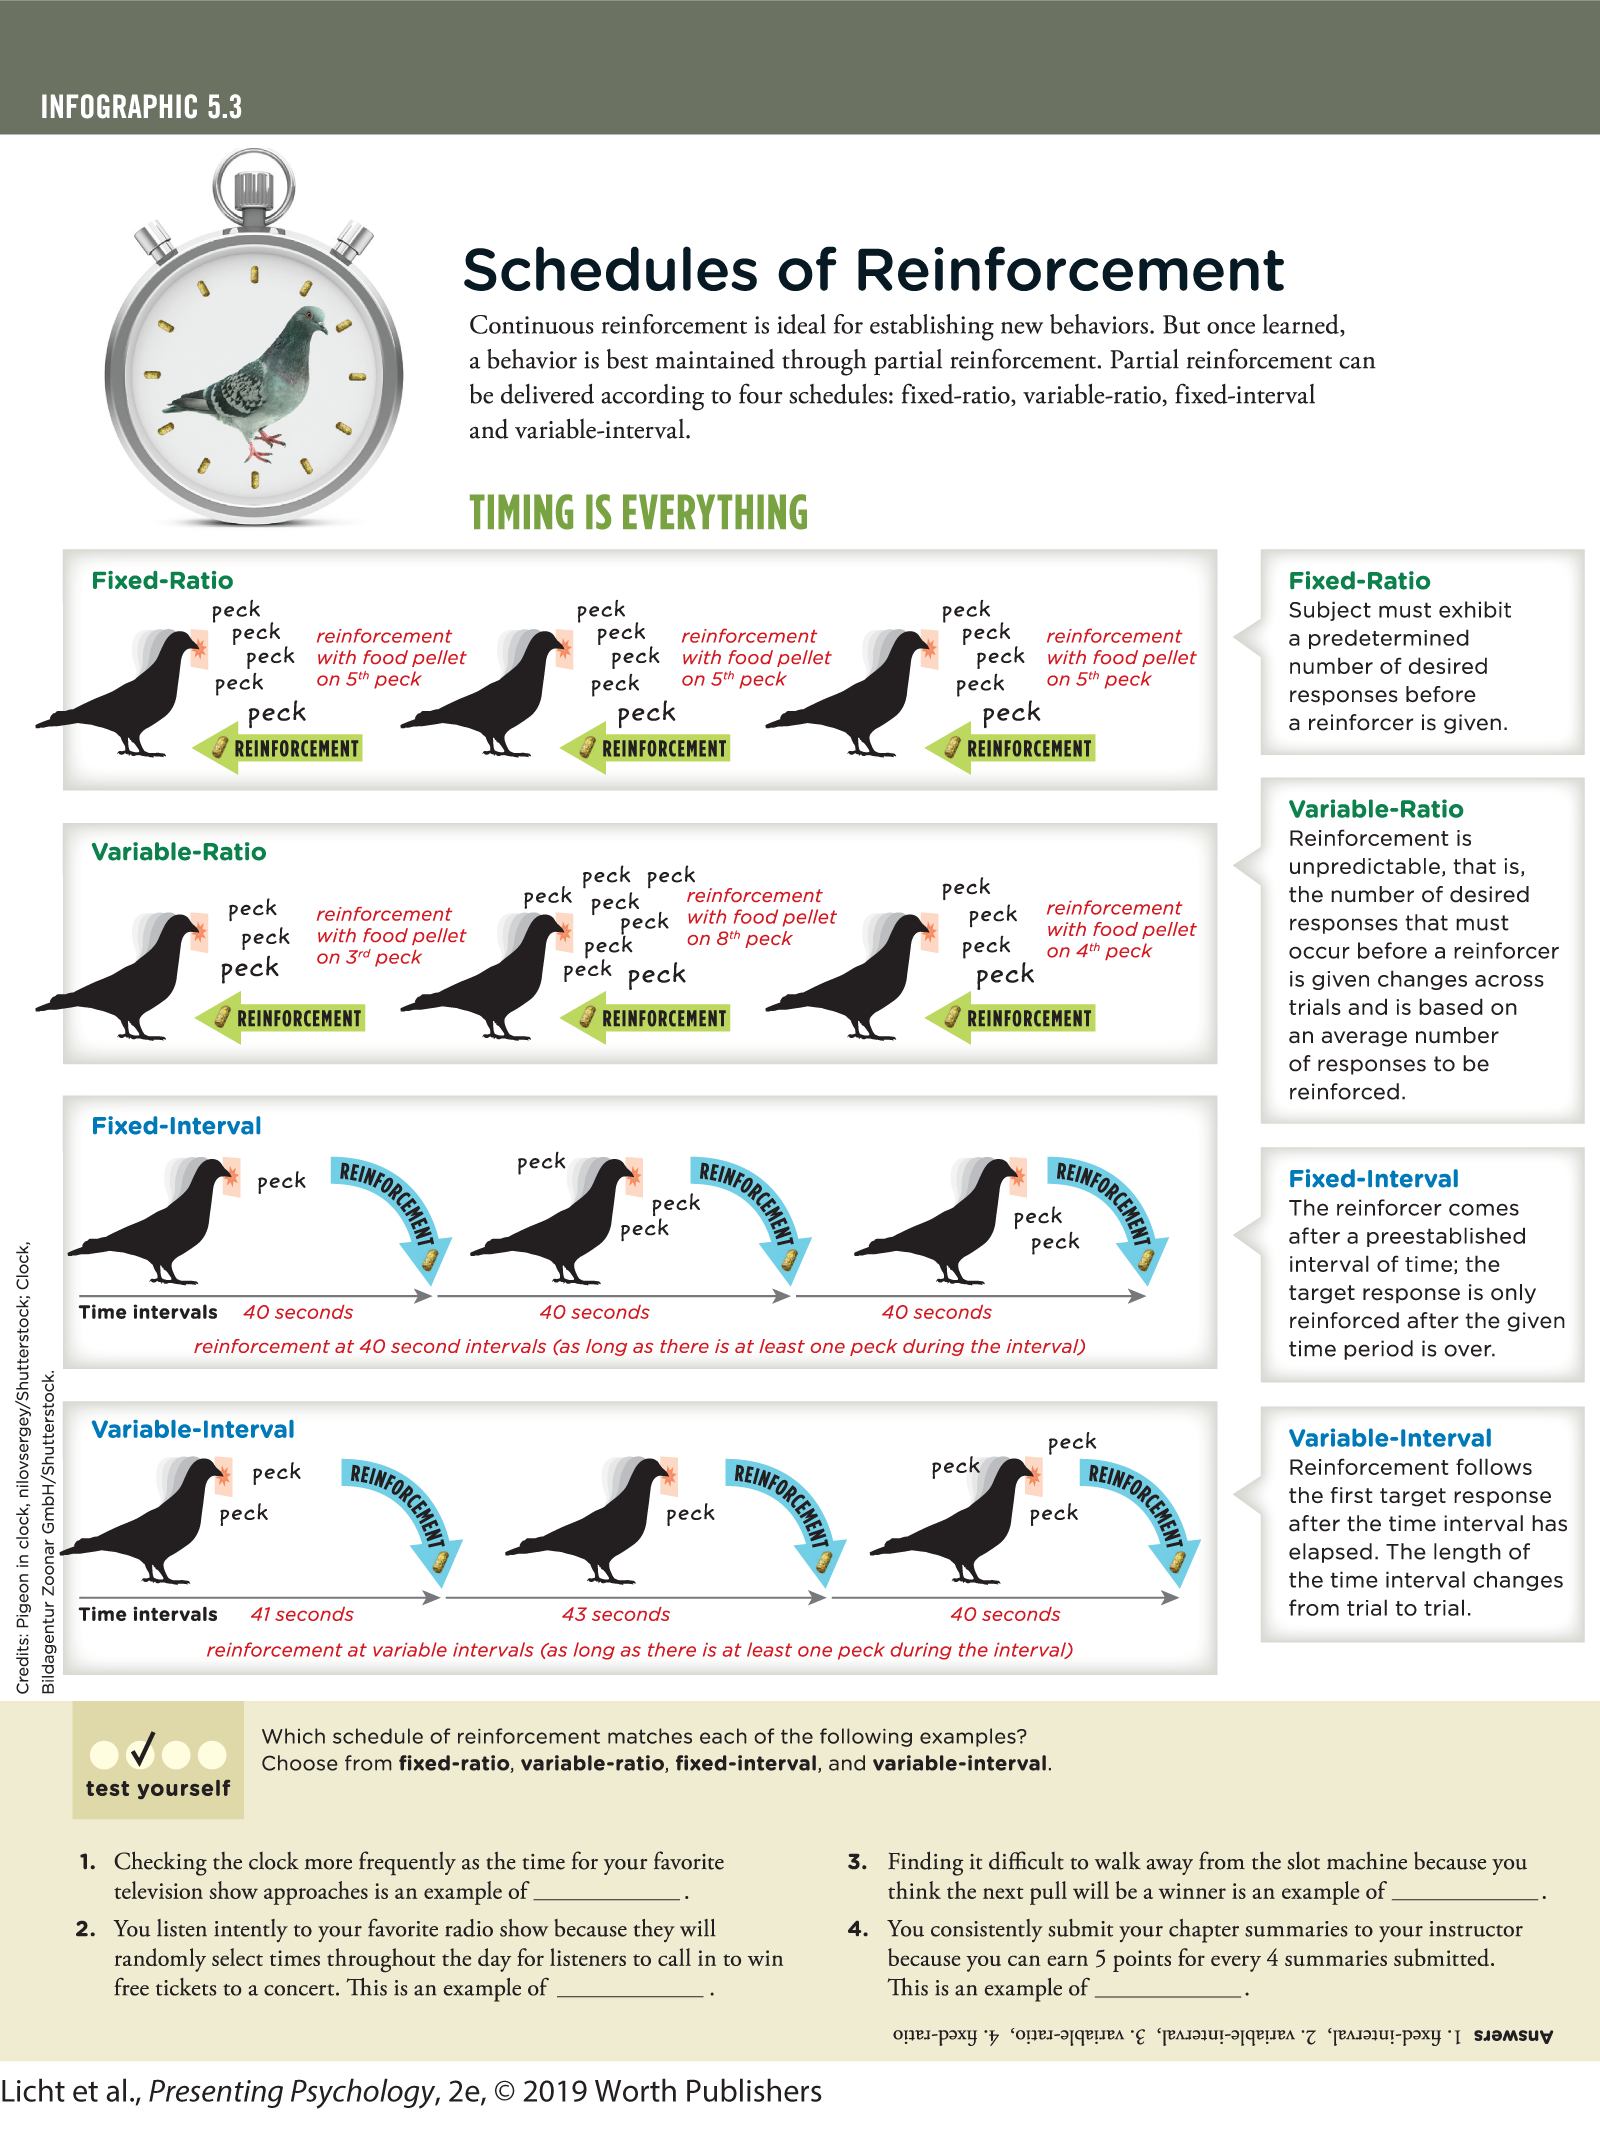 An infographic titled, Schedules of Reinforcement explains Fixed-ratio, Variable-Ratio, Fixed-Interval and Variable-Interval; keeping the behavior of a pigeon as an example. You can read full description from the link below